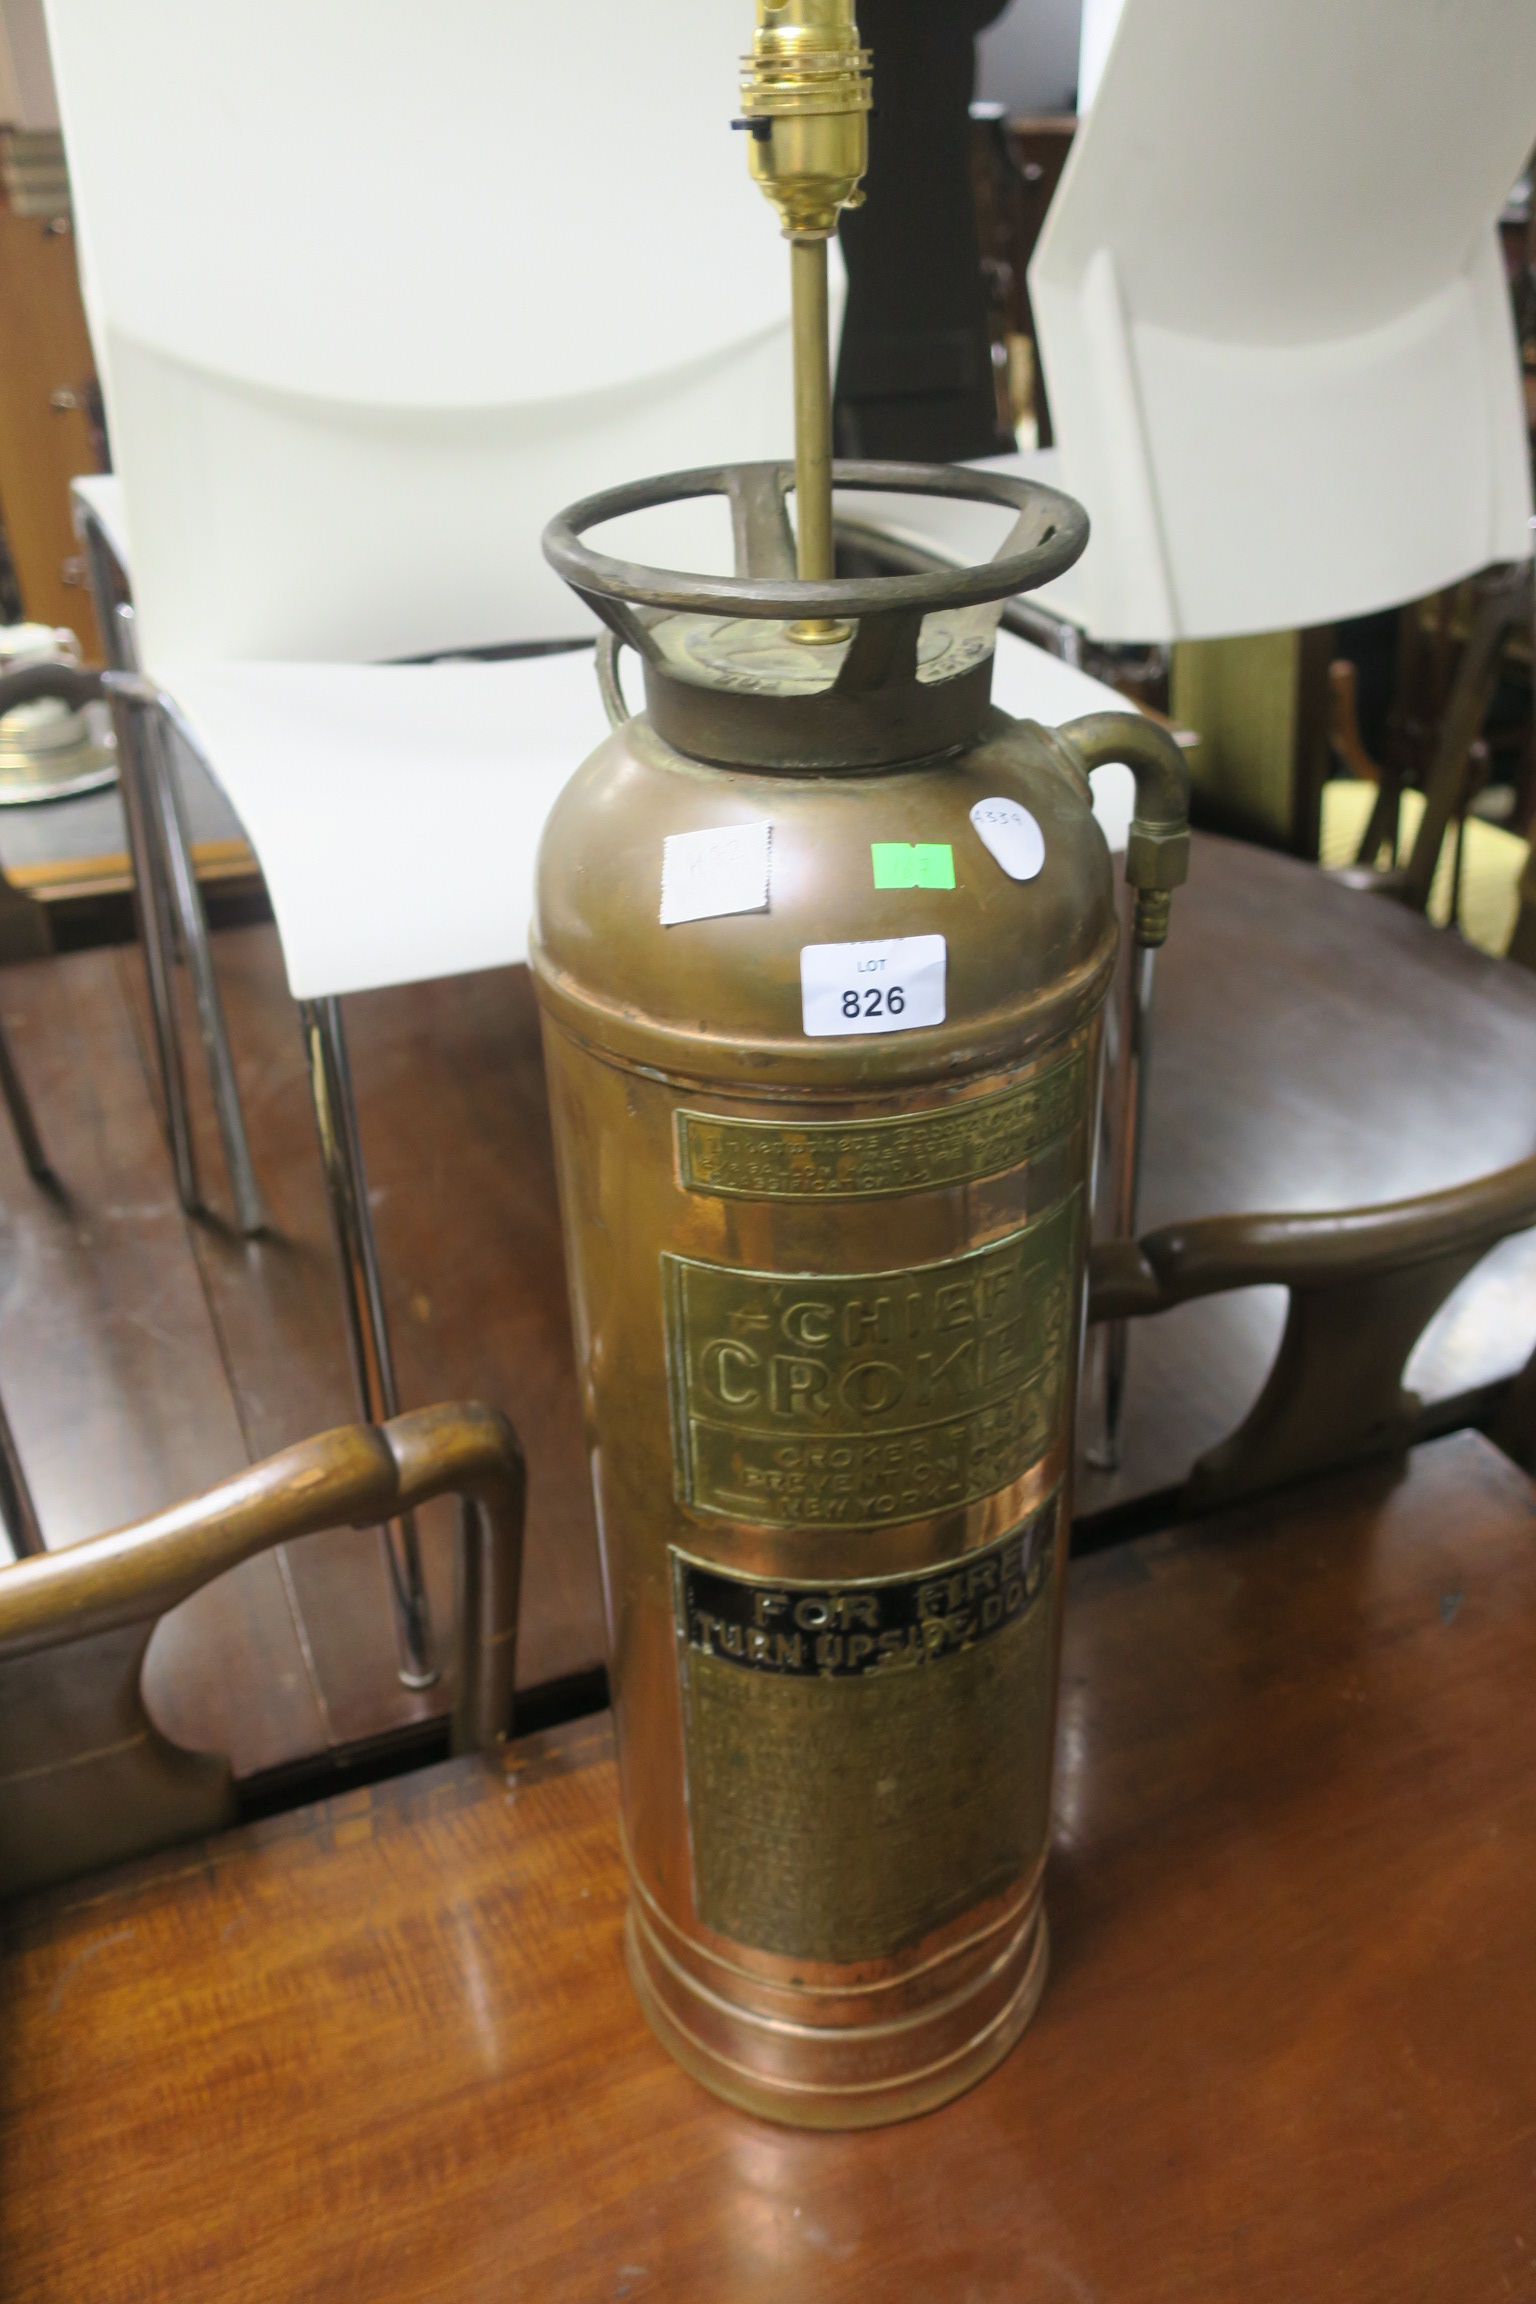 A BRASS AND COPPER FIRE EXTINGUISHER, in the form of a table lamp, enscribed Chief Croker New York.